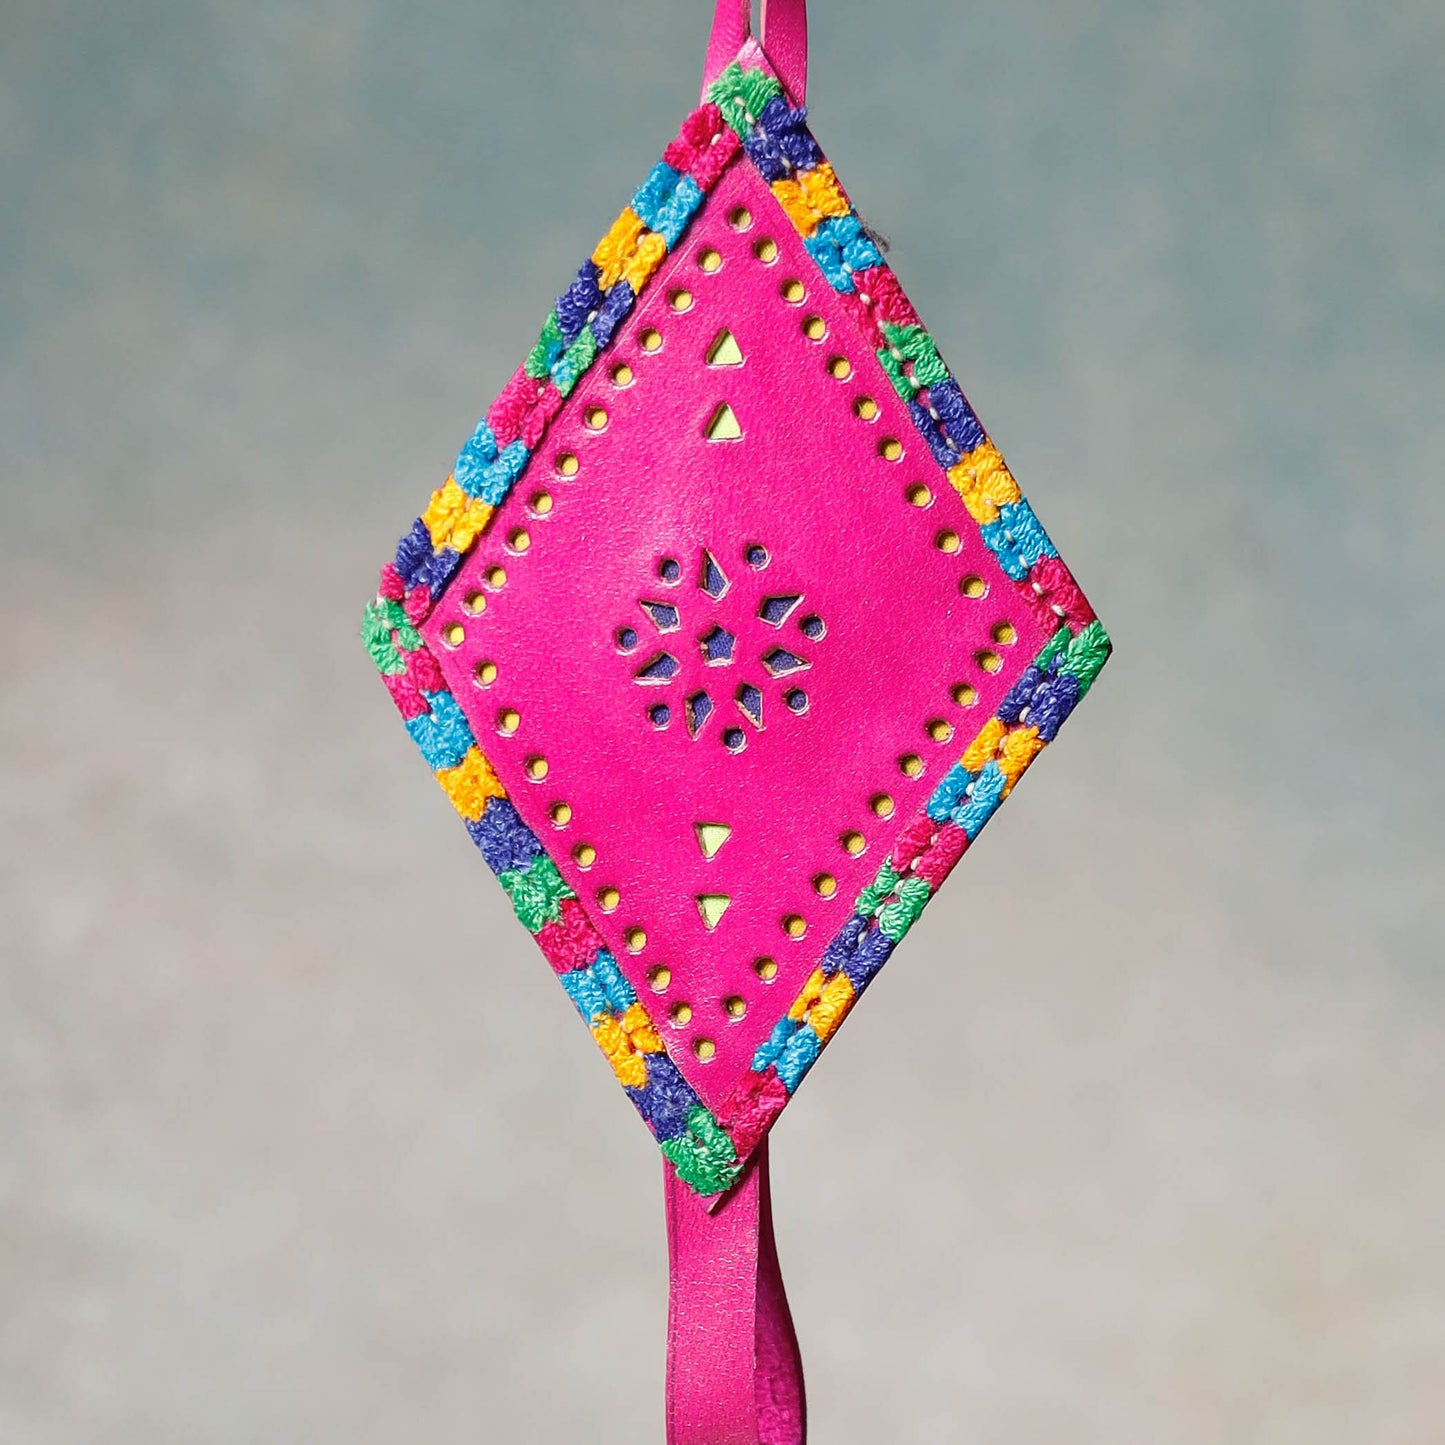 Kutch Copper Coated Bell With Leather Belt - Kite